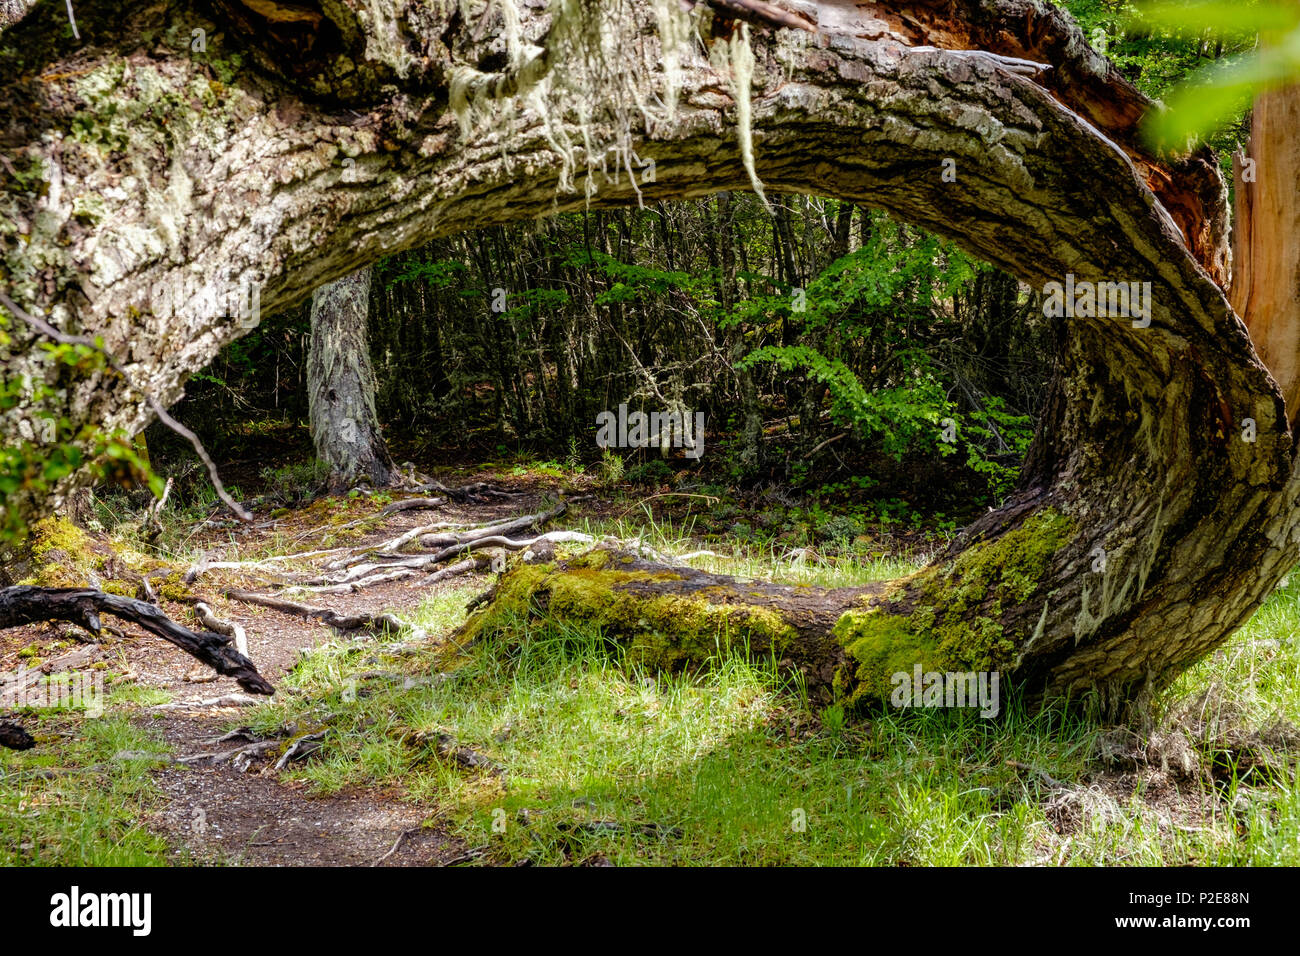 A broken tree trunk hangs in an awkward position over a walking path in Tierra del Fuego national park in Ushuaia, Argentina. Stock Photo